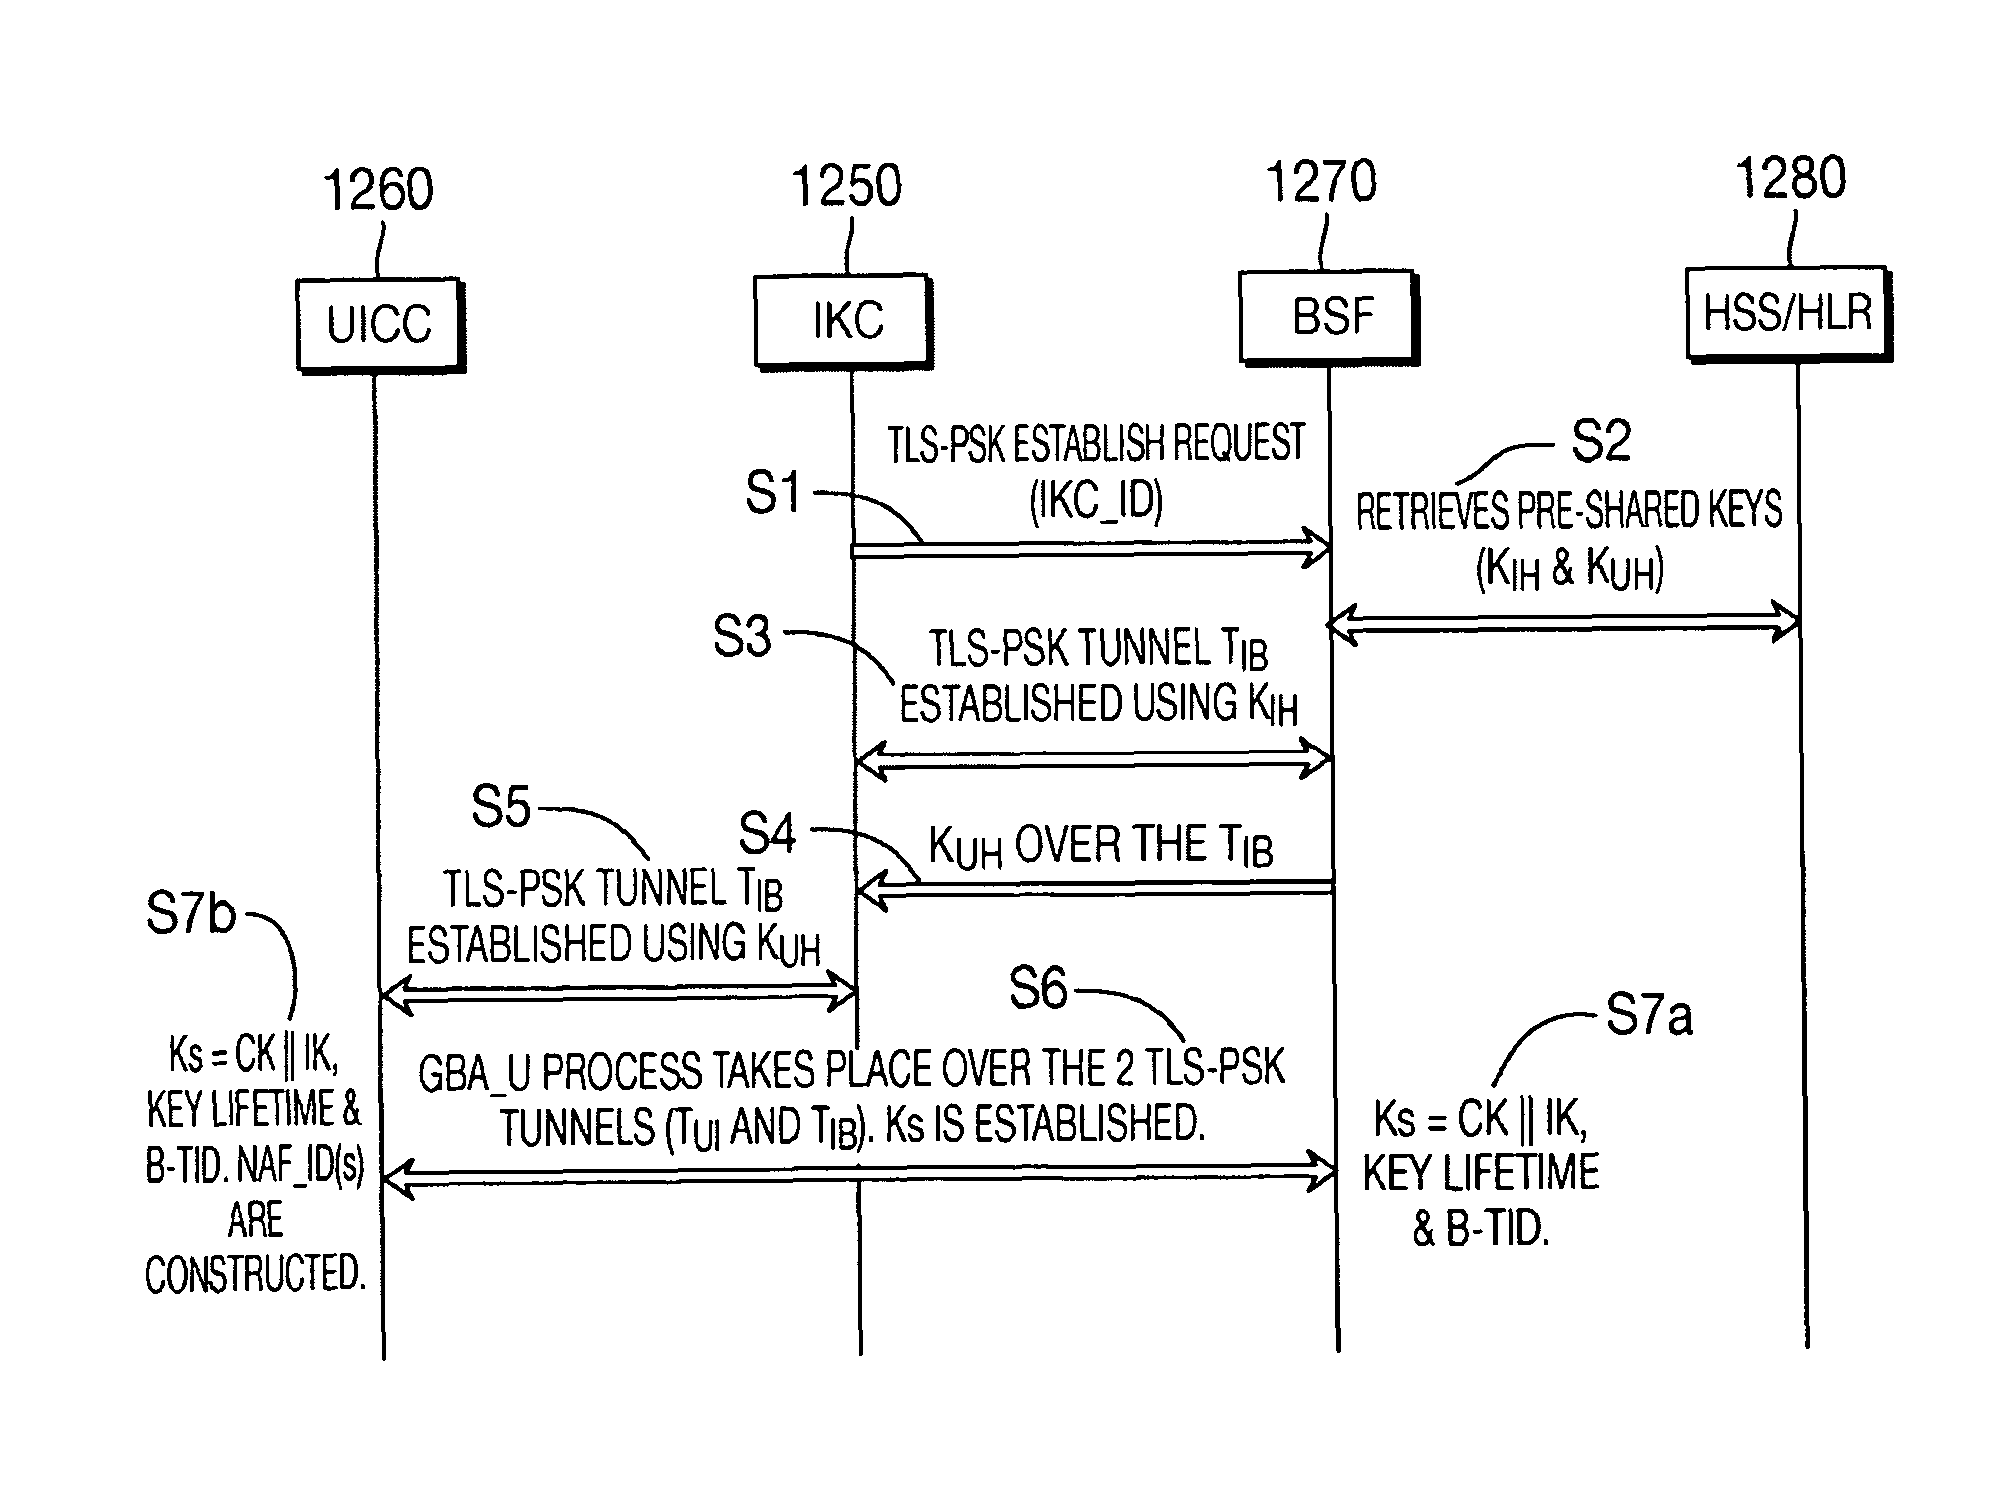 Techniques for secure channelization between UICC and a terminal